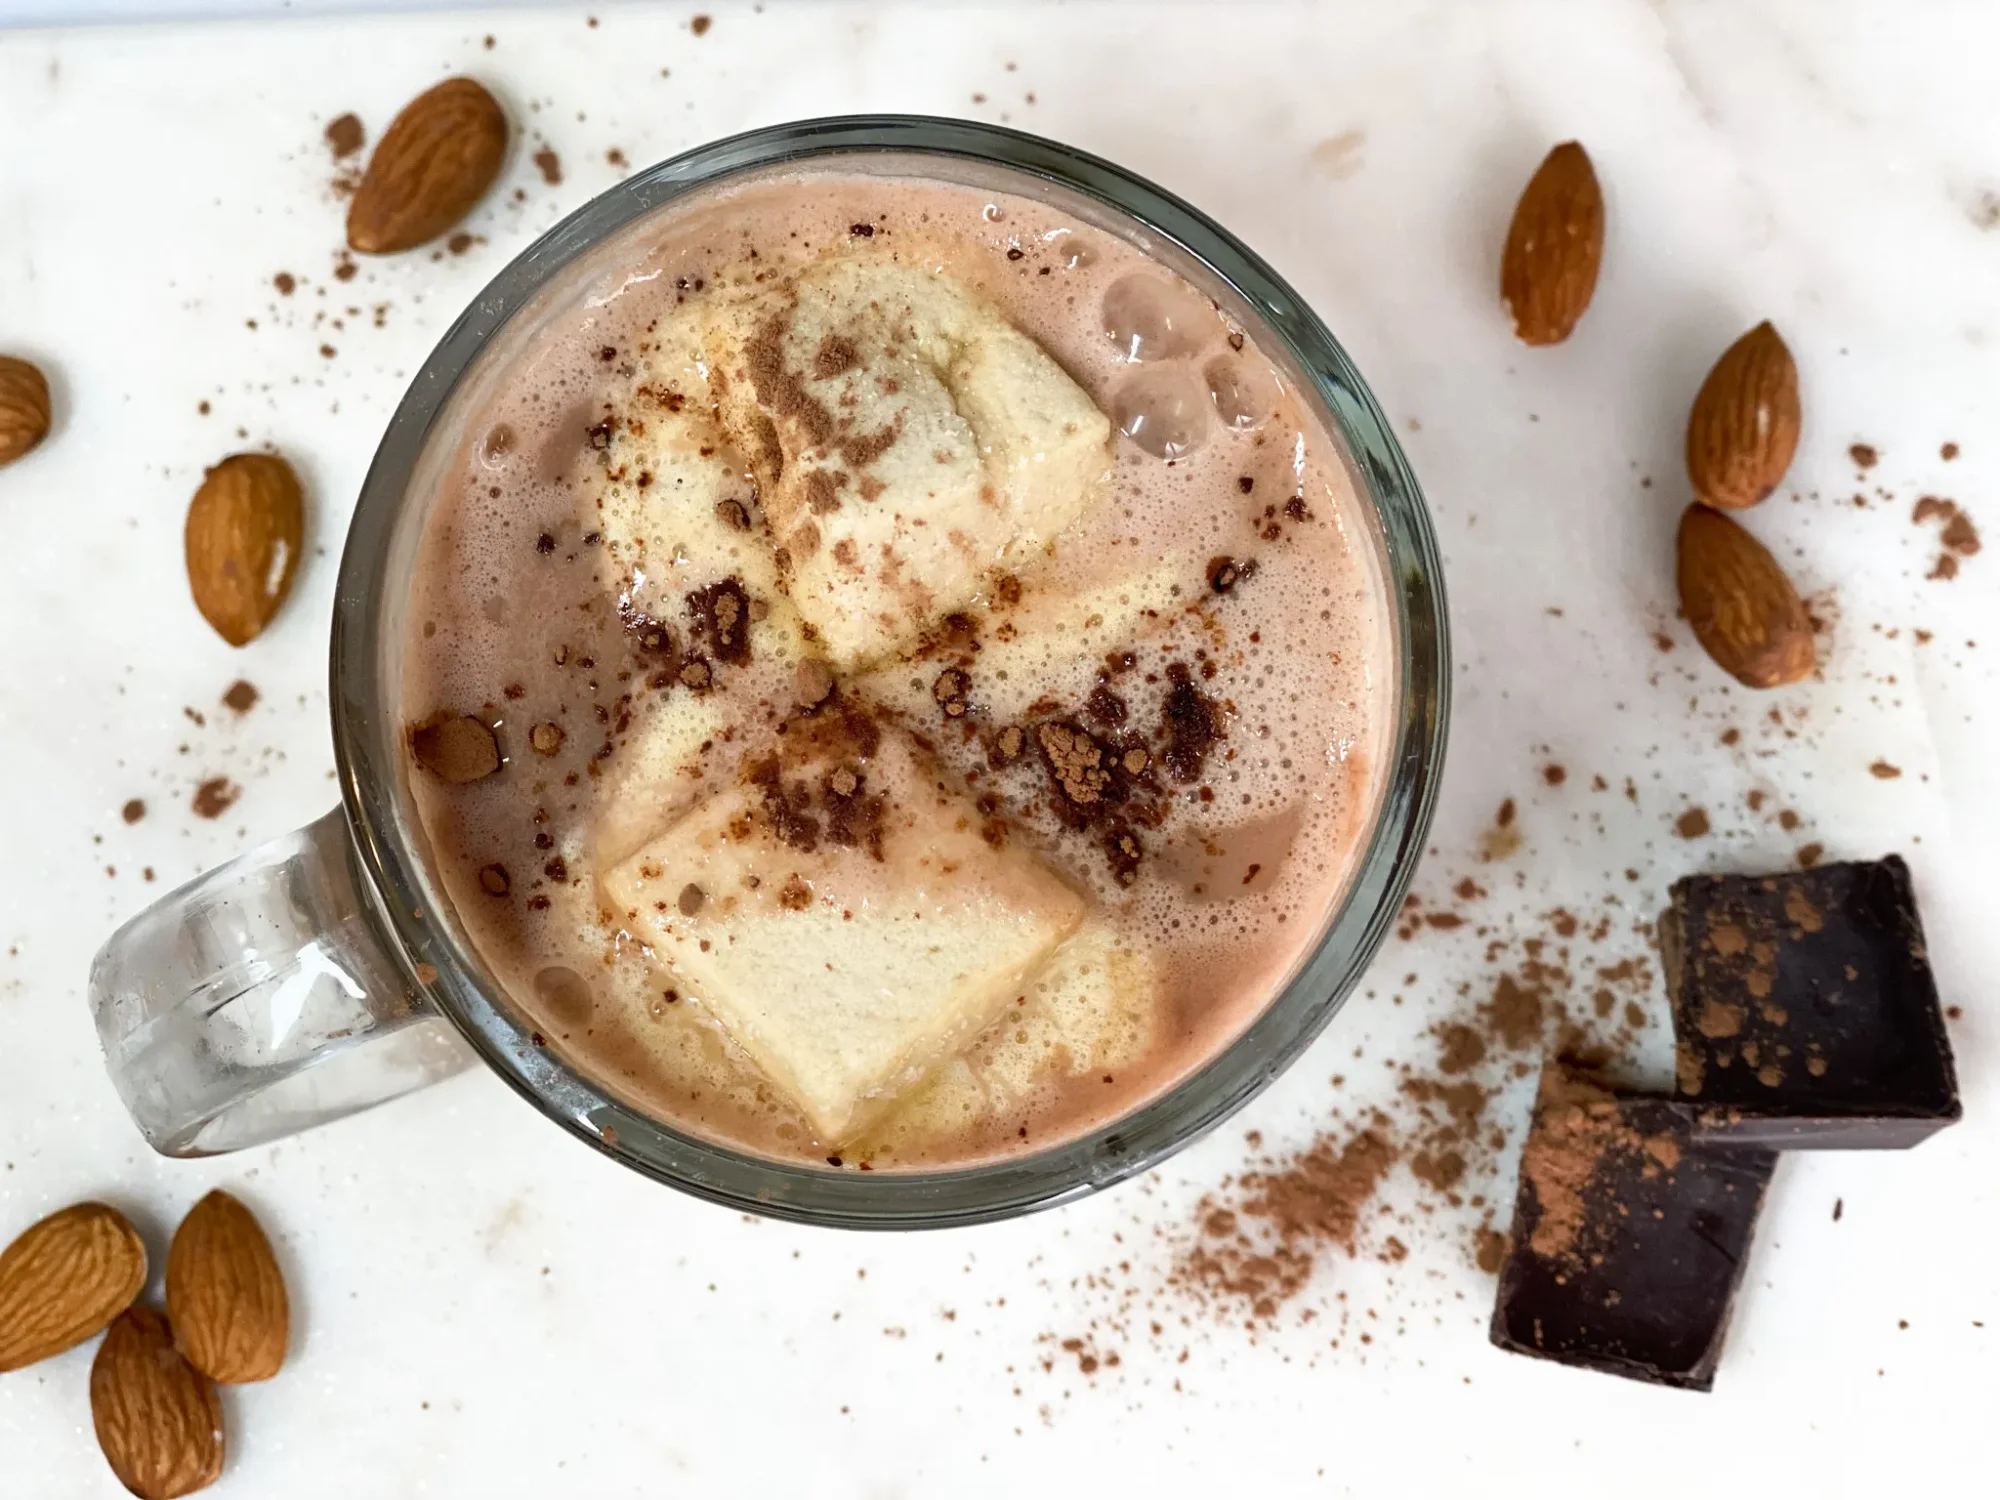 Top of view image of a mug of warm healthy hot chocolate with chocolate collagen. Marshmallows and a sprinkle of cacao are sprinkled on top. Almonds, cacao, and chunks of dark chocolate are sprinkled around the mug on a marble surface.